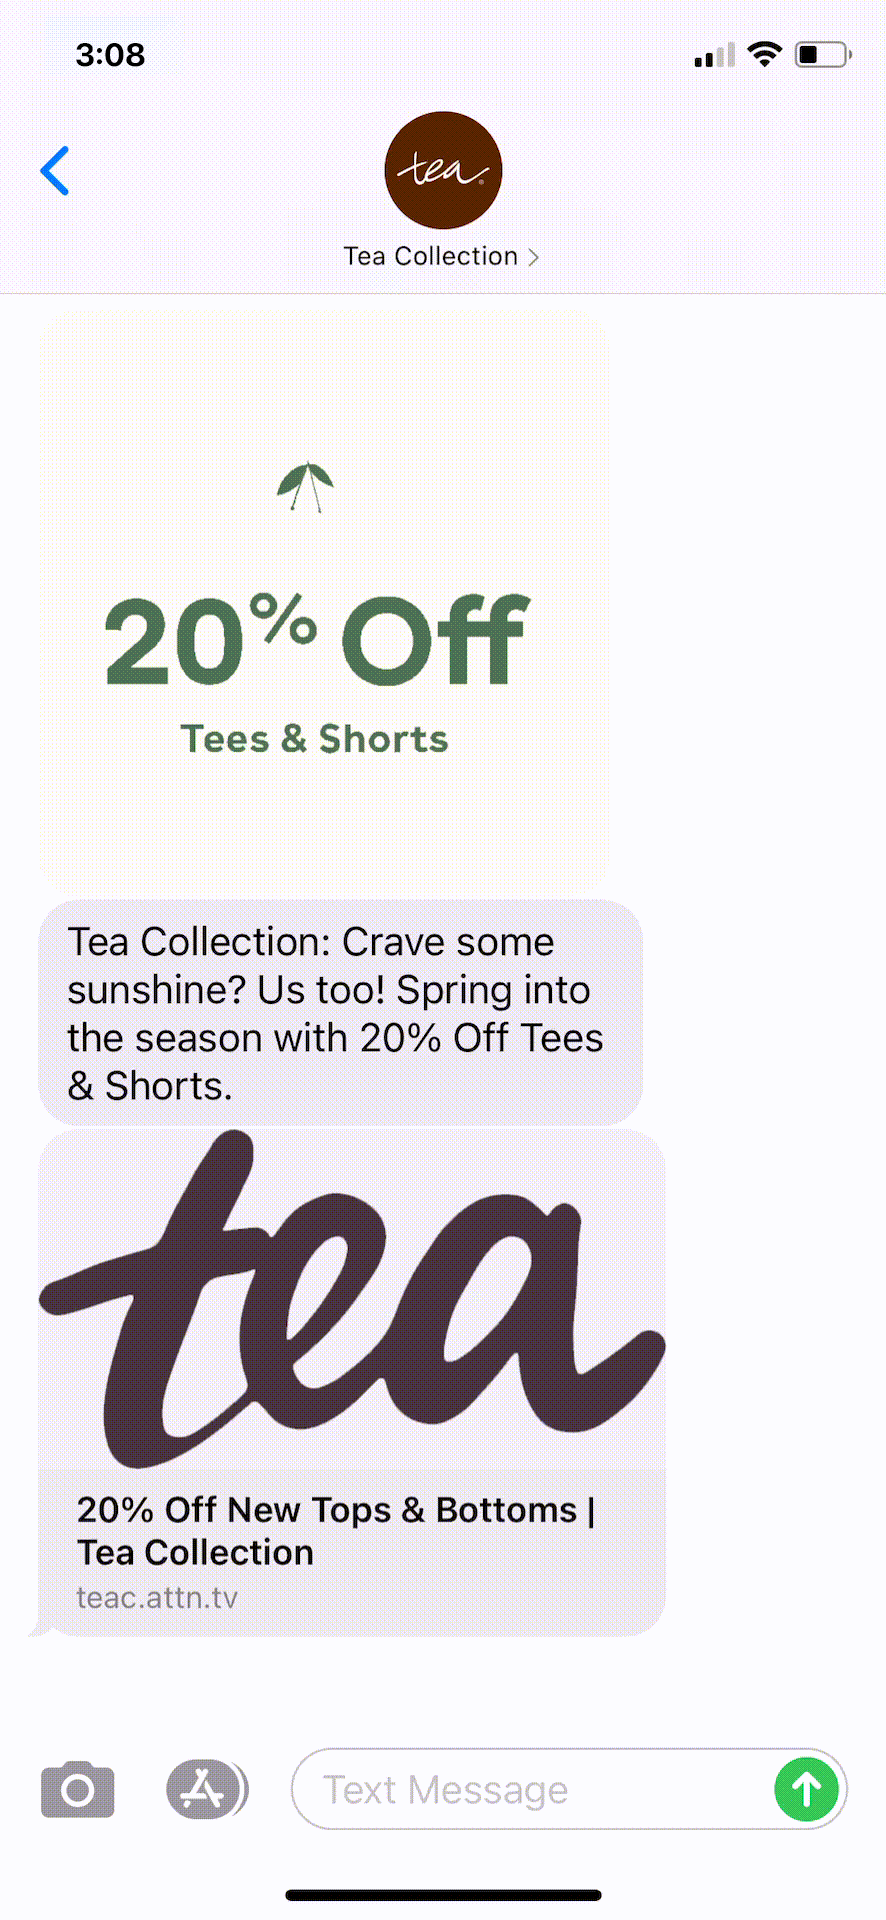 Tea-Collection-Text-Message-Marketing-Example-02.11.2021